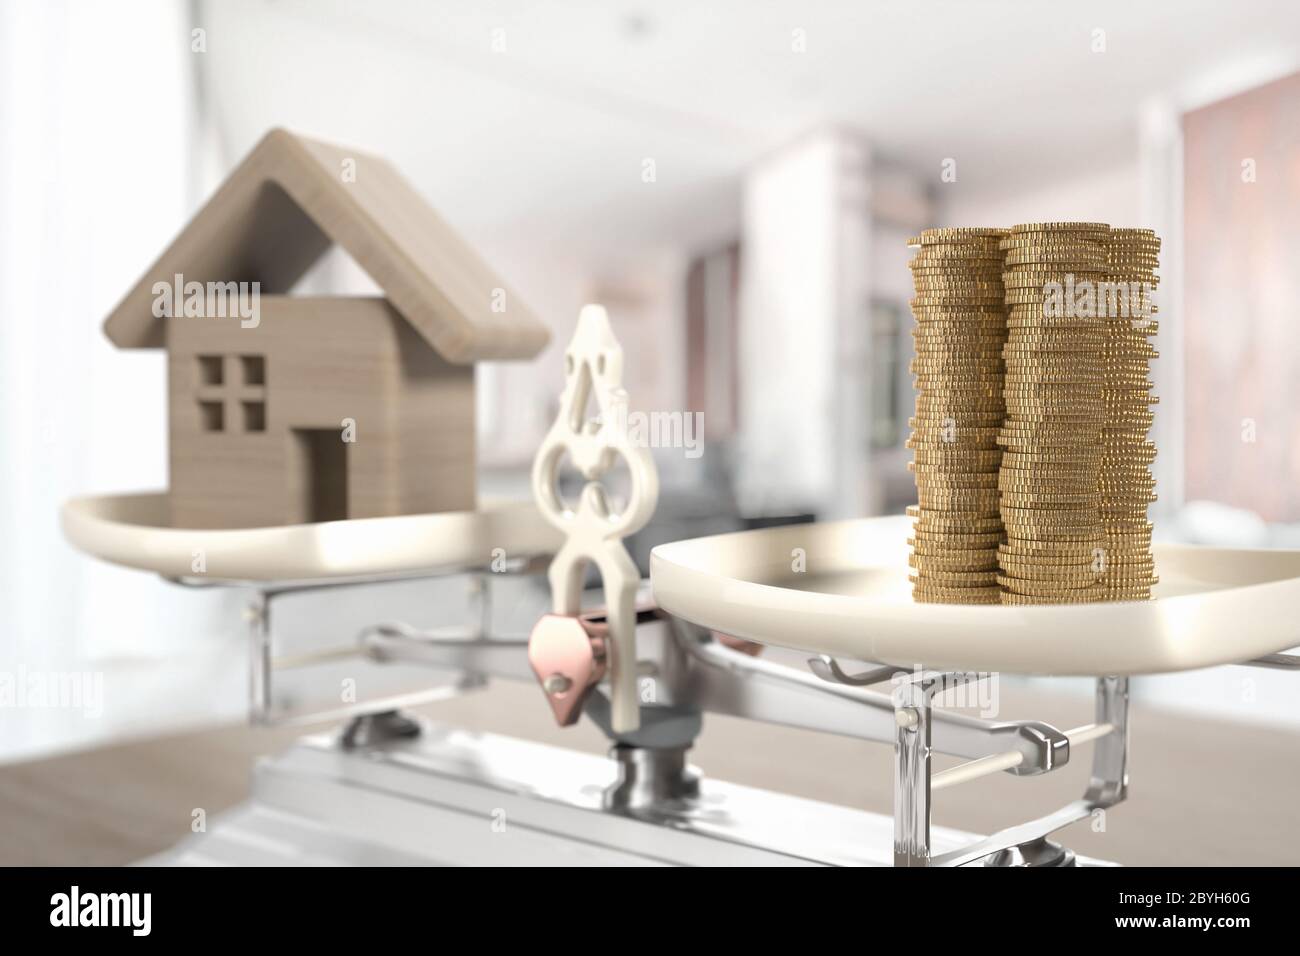 House and coins on the scale as an illustration of a home loan and other real estate expenses. 3d illustration Stock Photo